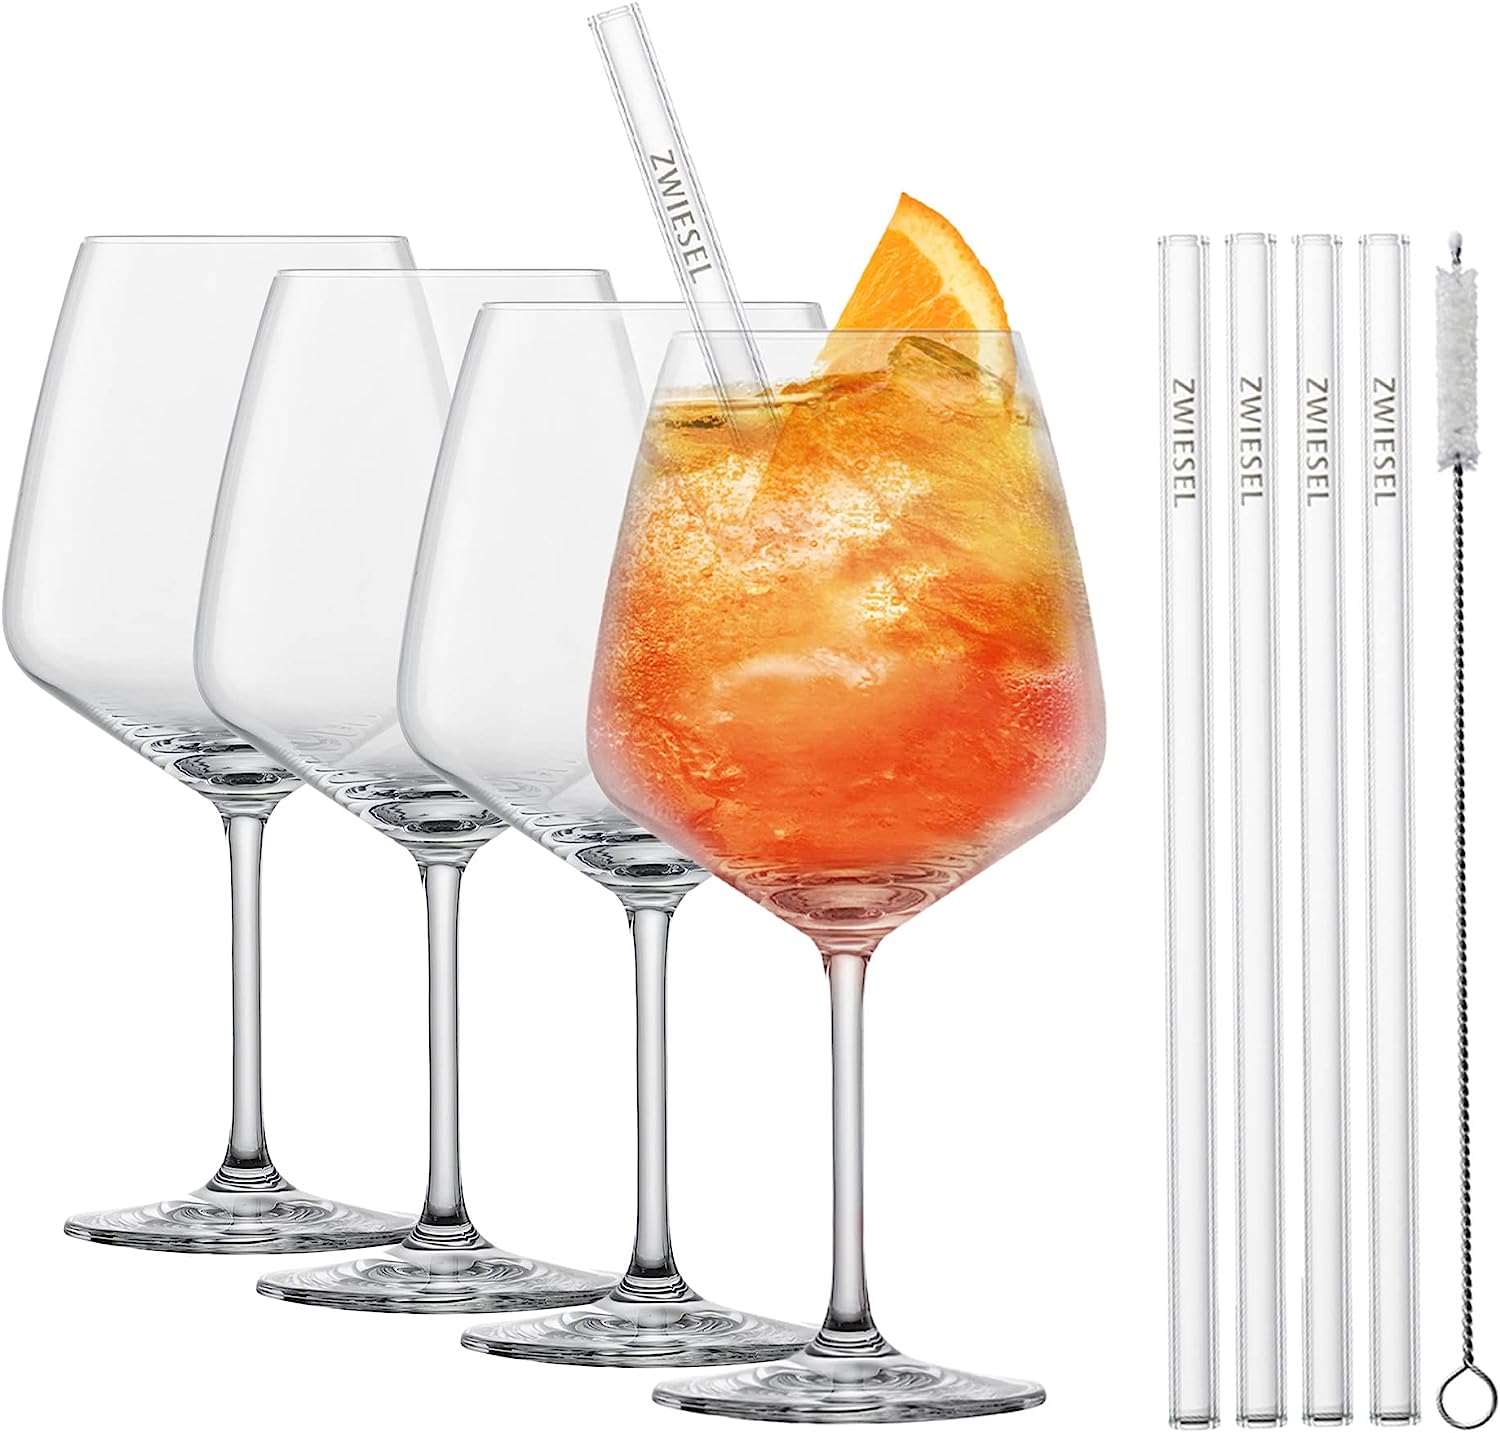 SCHOTT ZWIESEL After Work Drinks Taste Set of 4 Cocktail Glasses, 4 Glass Straws and 1 Cotton Brush, Dishwasher Safe Tritan Crystal Glasses, Made in Germany (Item No. 130014)